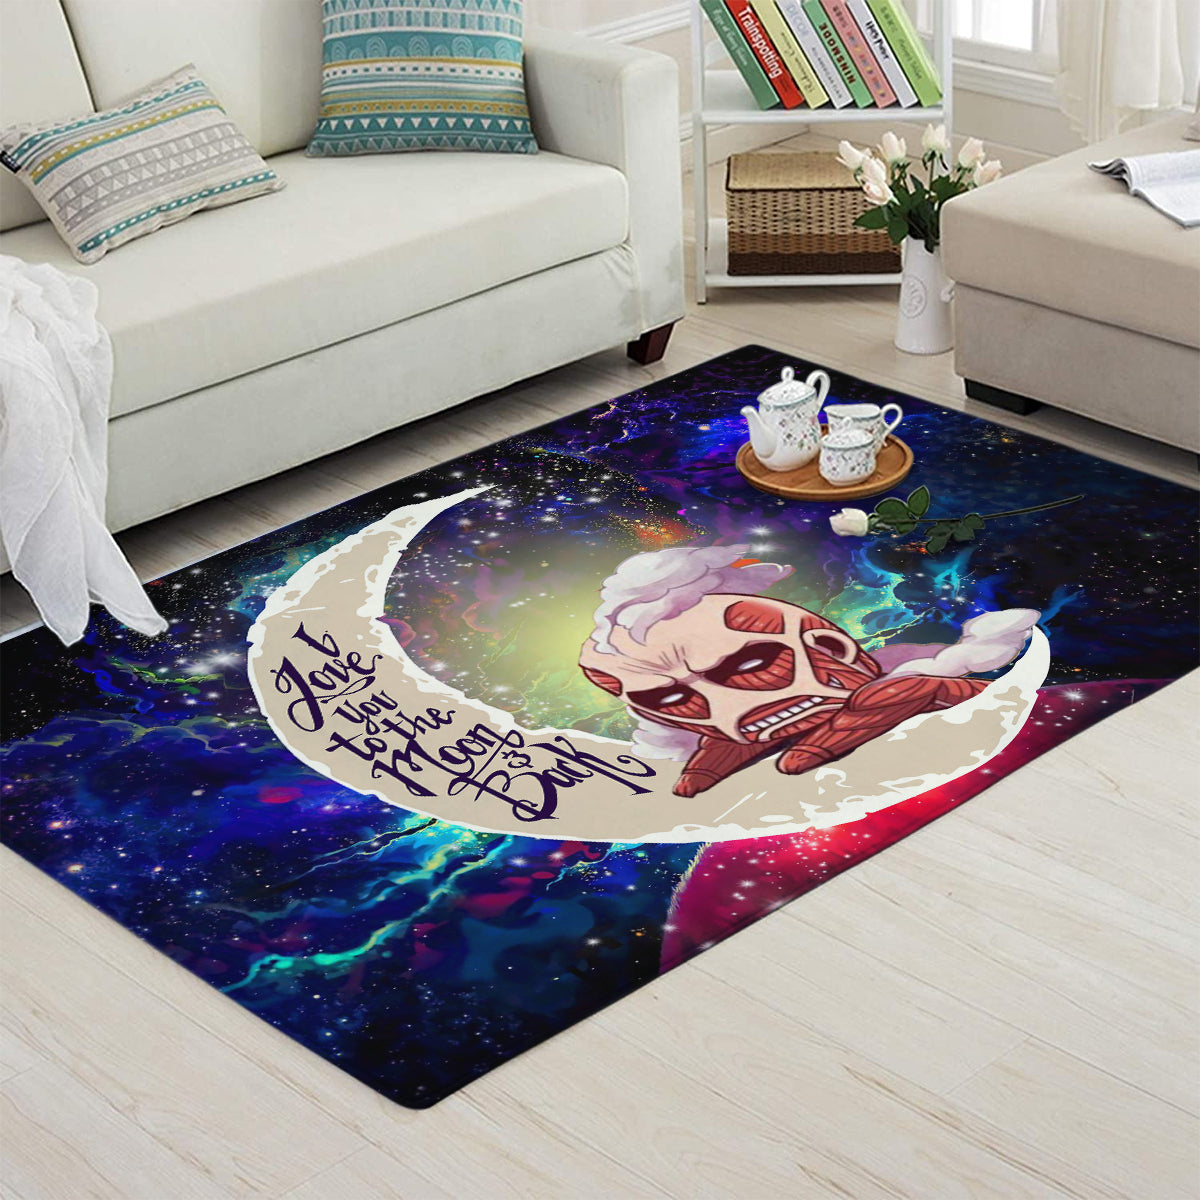 Attack on titan Love You To The Moon Galaxy Carpet Rug Home Room Decor